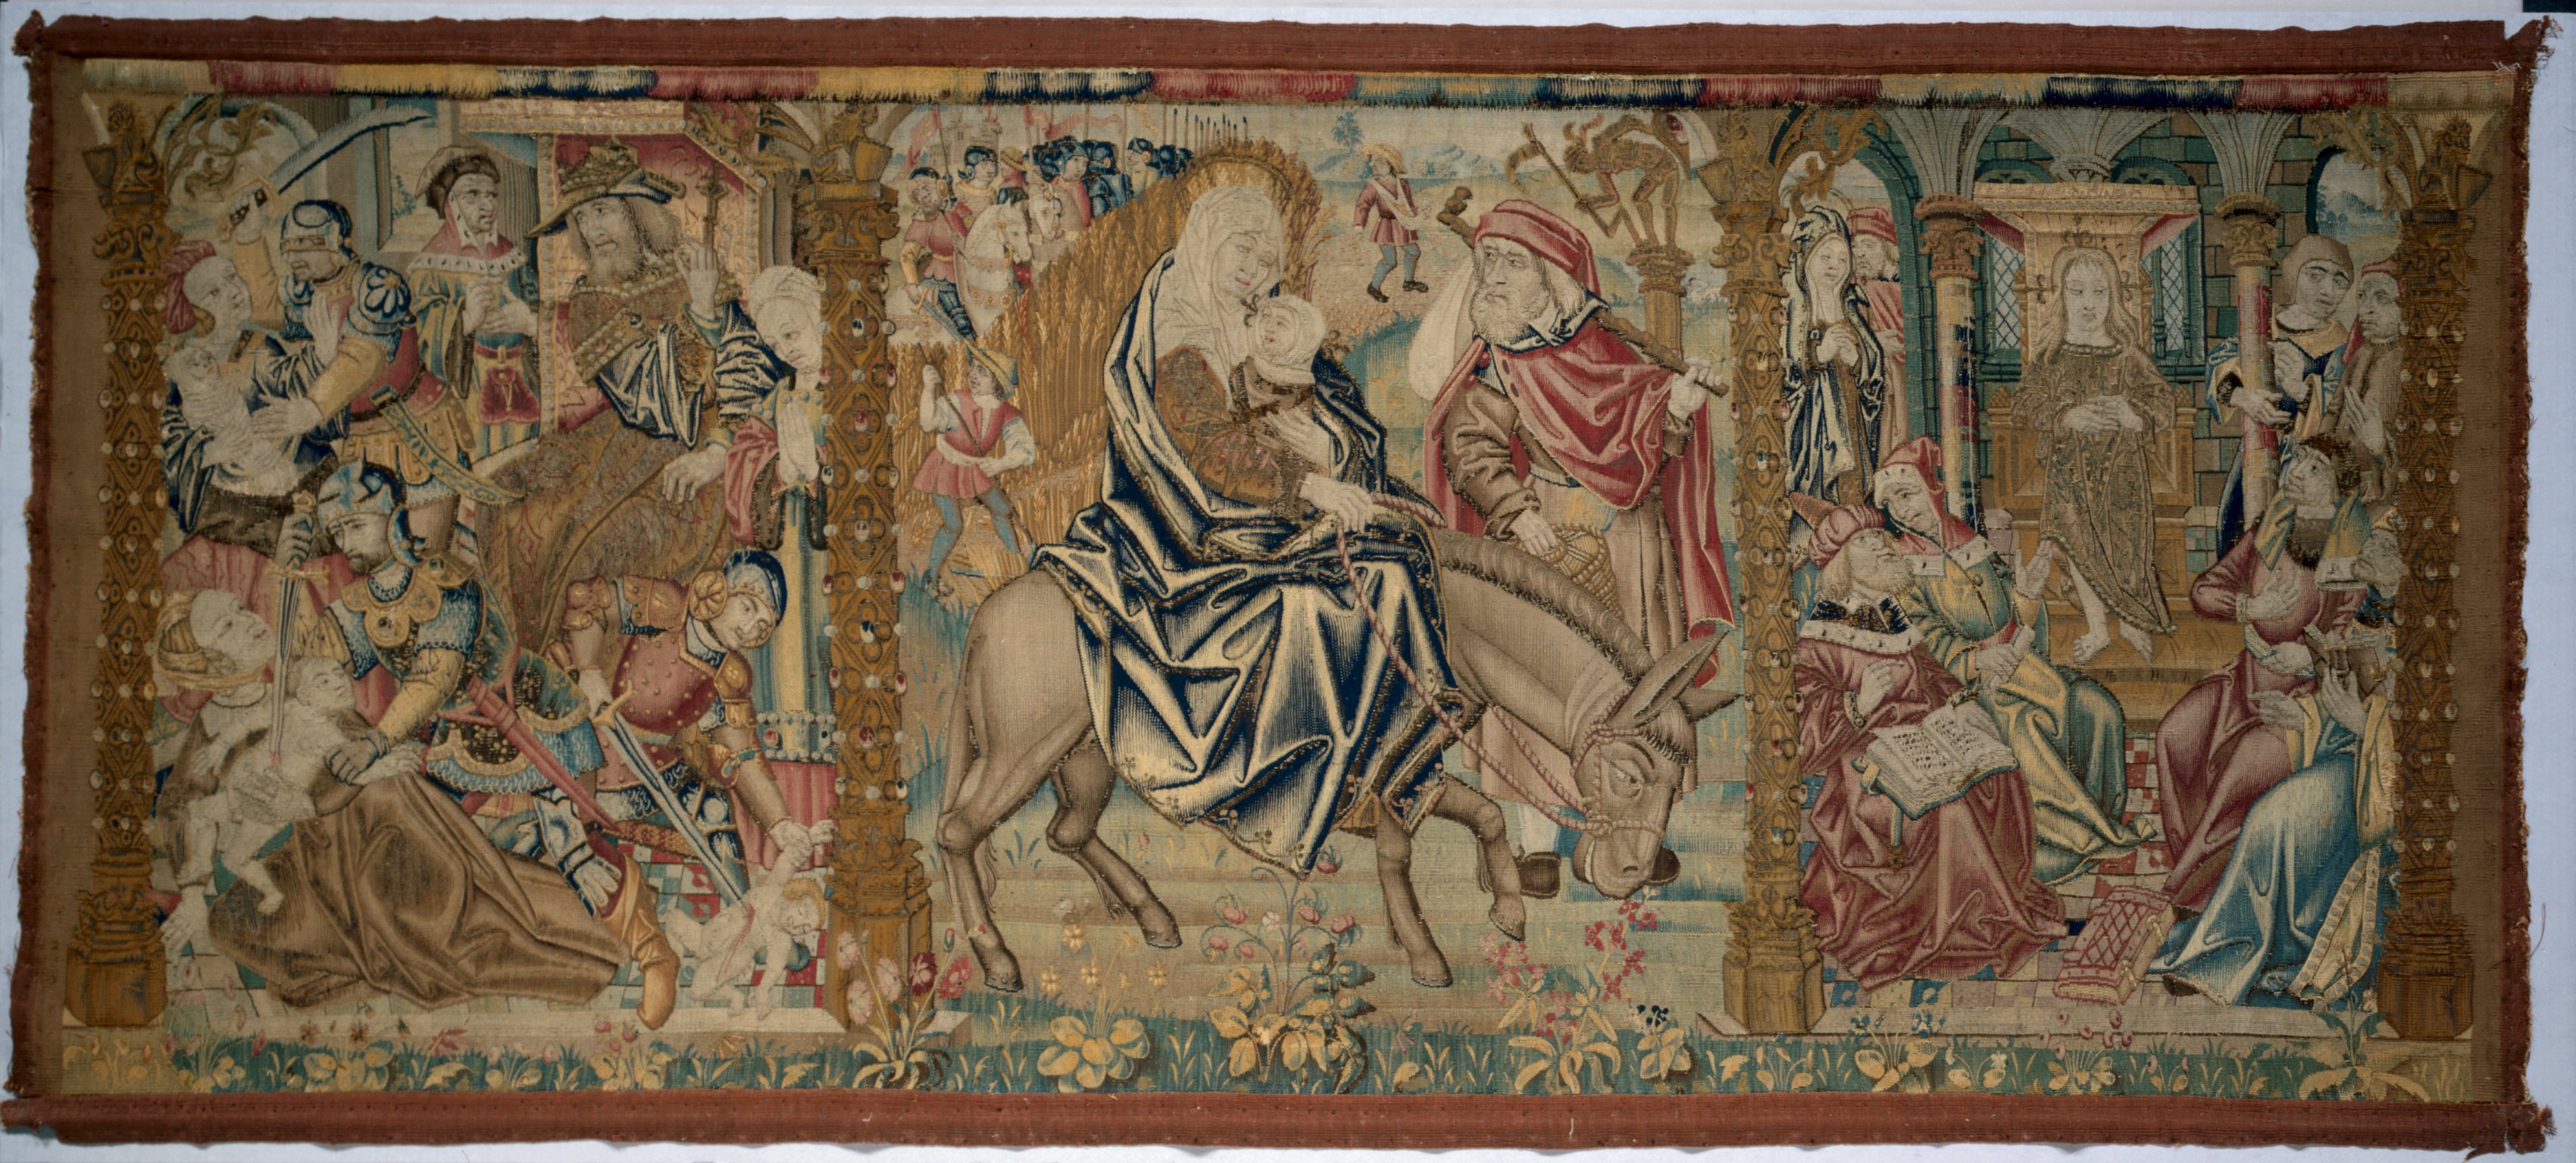 Altar Frontal: Scenes from the Childhood of Christ